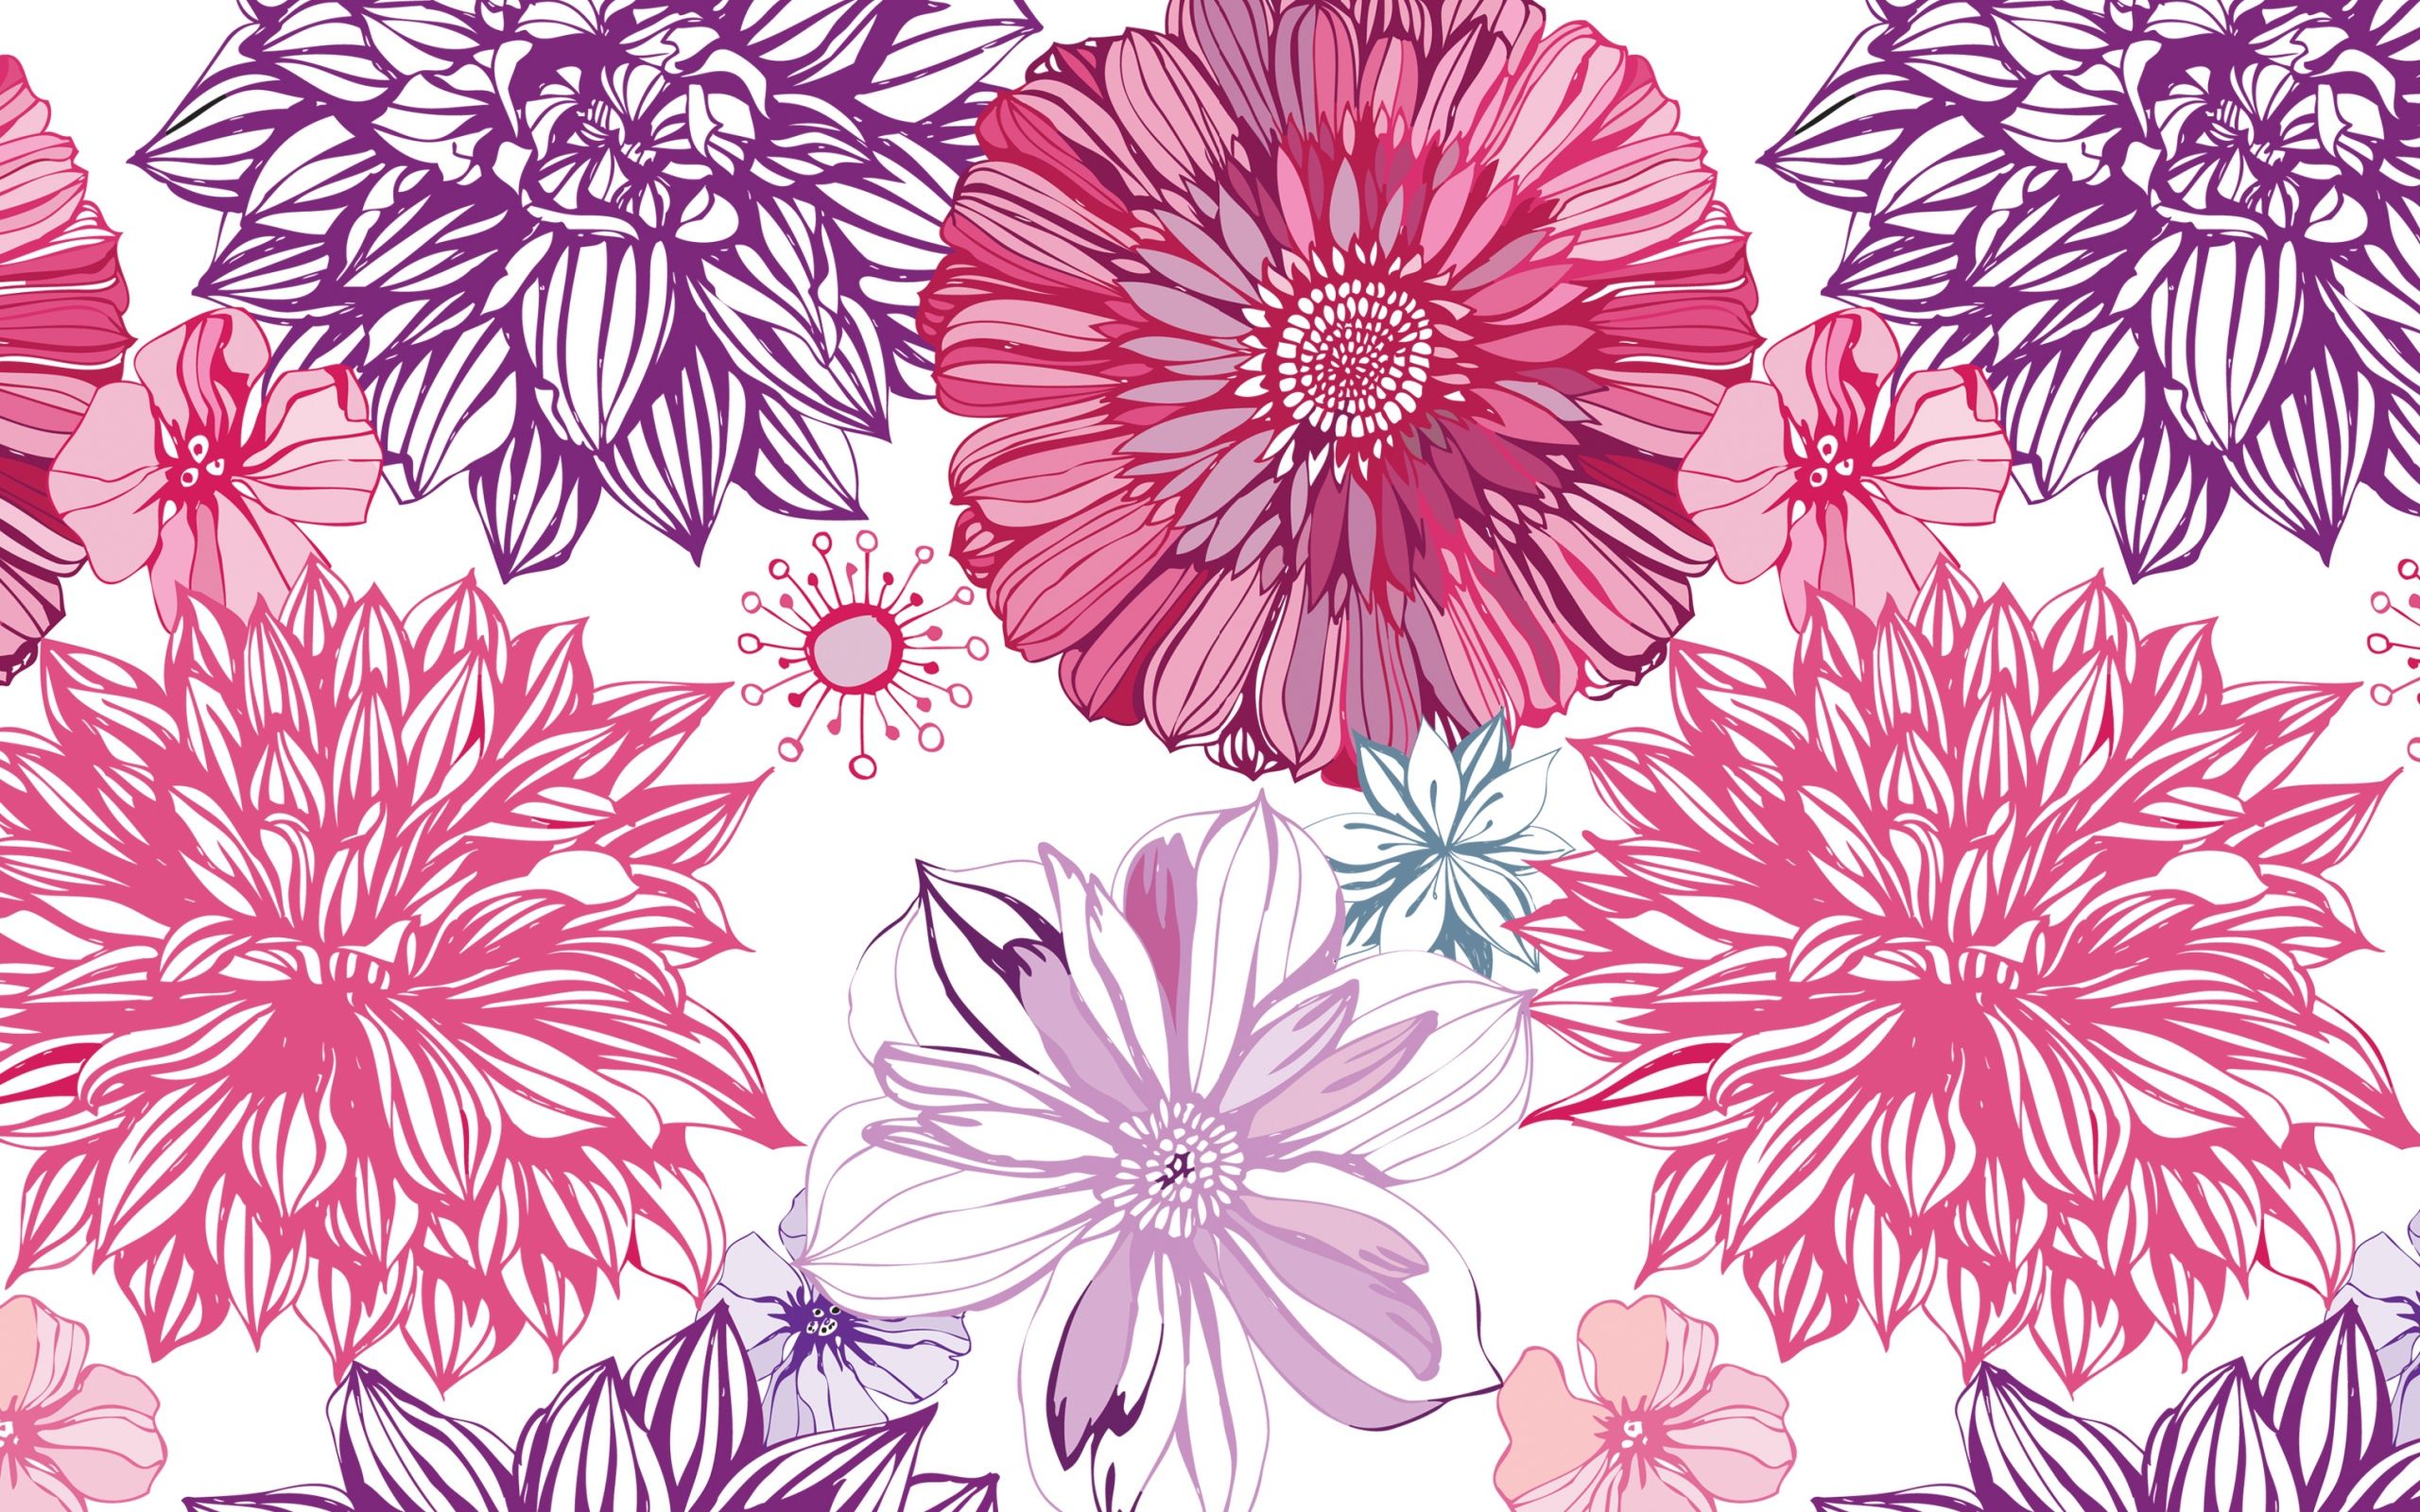 Download Wallpaper 2560x1600 Asters, Patterns, Backgrounds ...